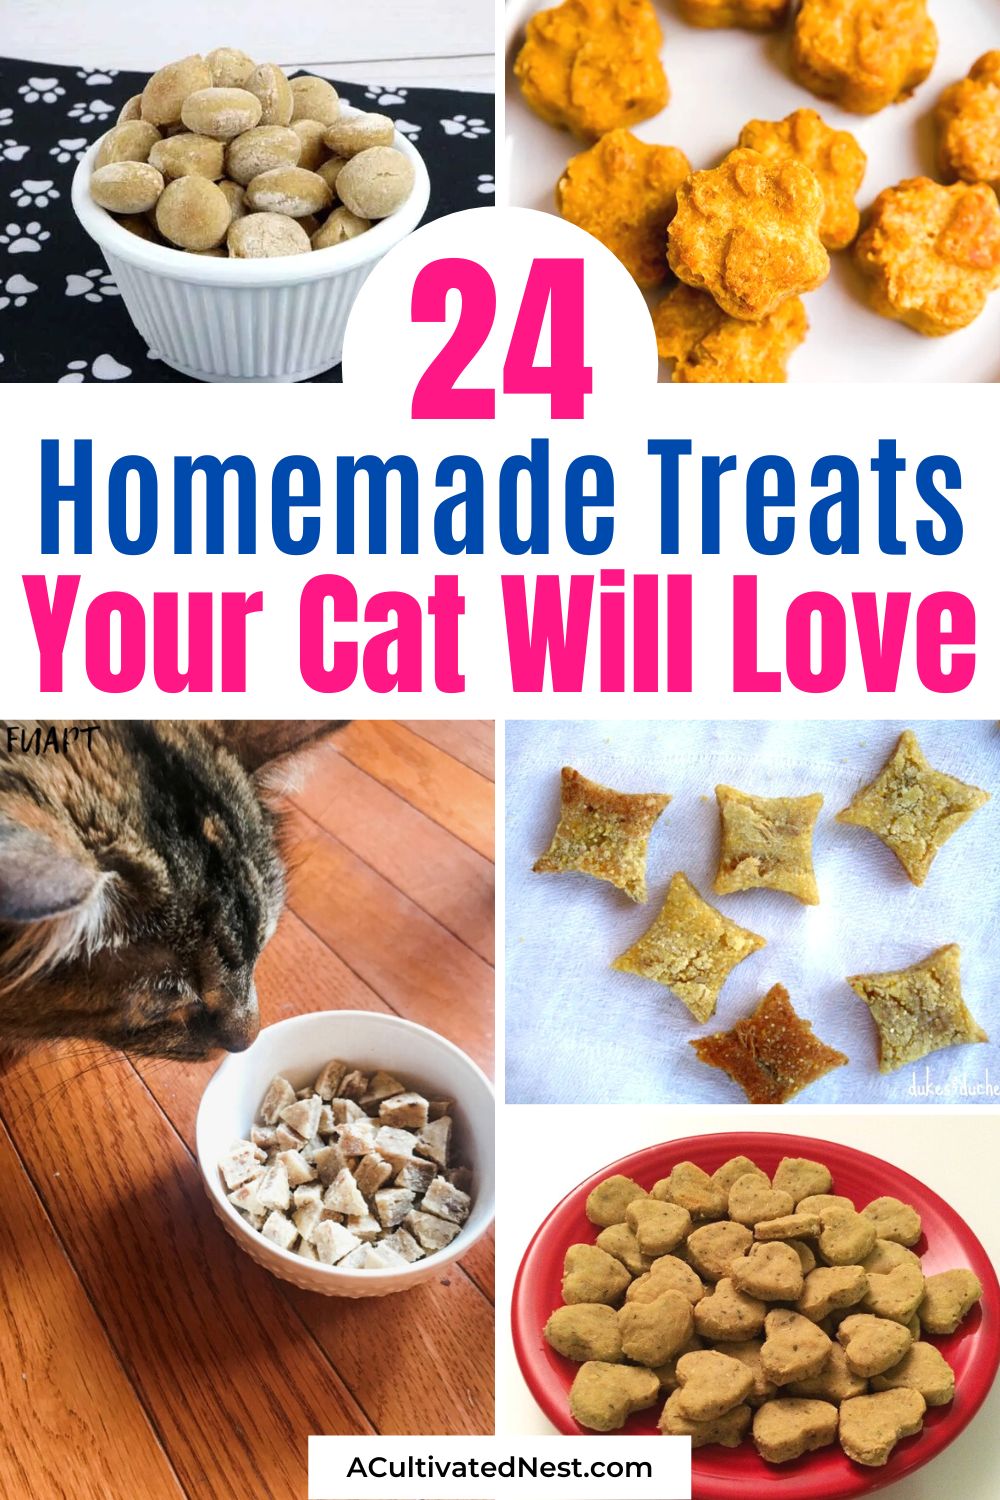 24 Homemade Cat Treats Your Cat Will Love- If you want to give your cat a delicious and healthy treat on a budget, you need to make some of these tasty homemade cat treats! | #homemadeCatTreats #catRecipes #homemadePetTreats #petRecipes #ACultivatedNest